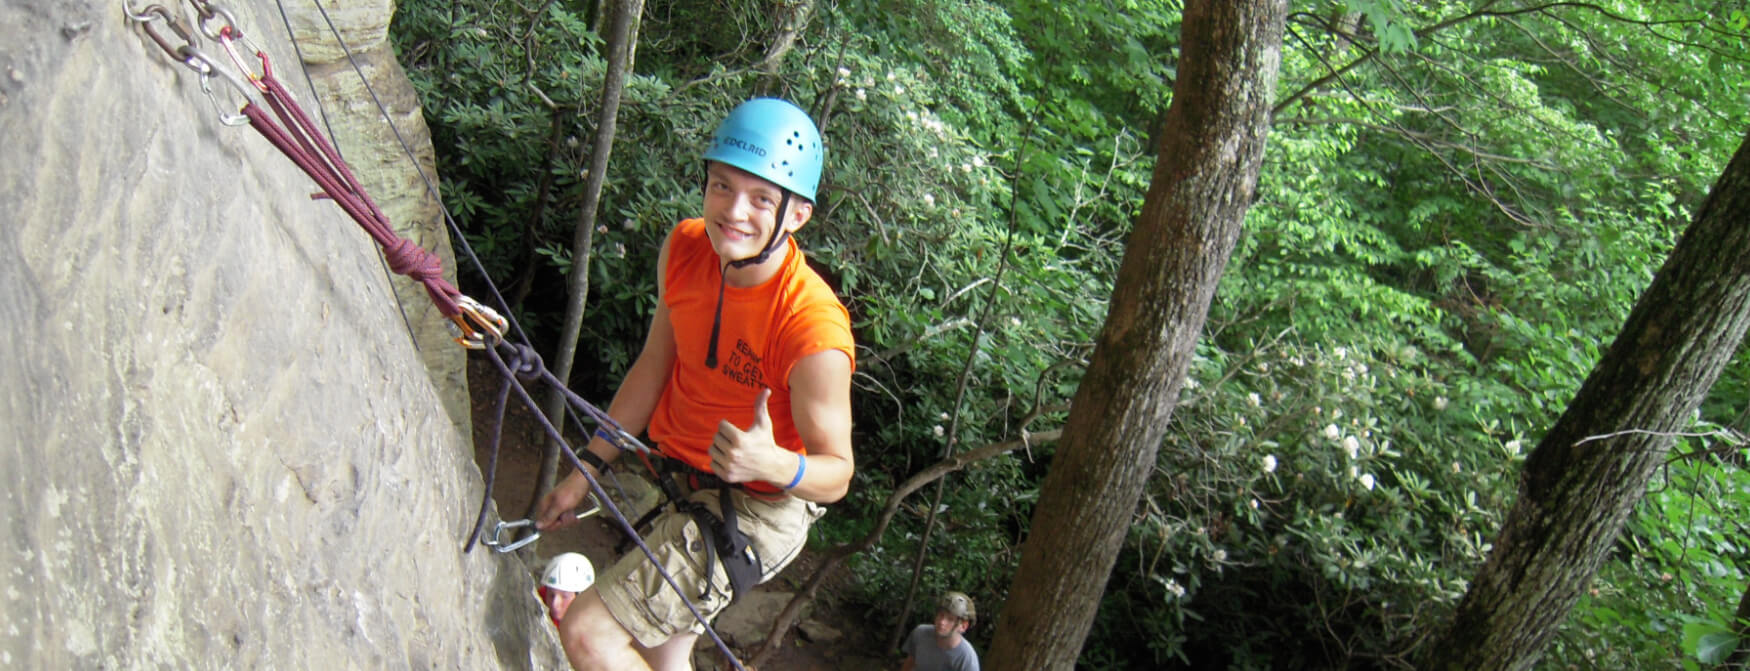 Climbing in the Red River Gorge